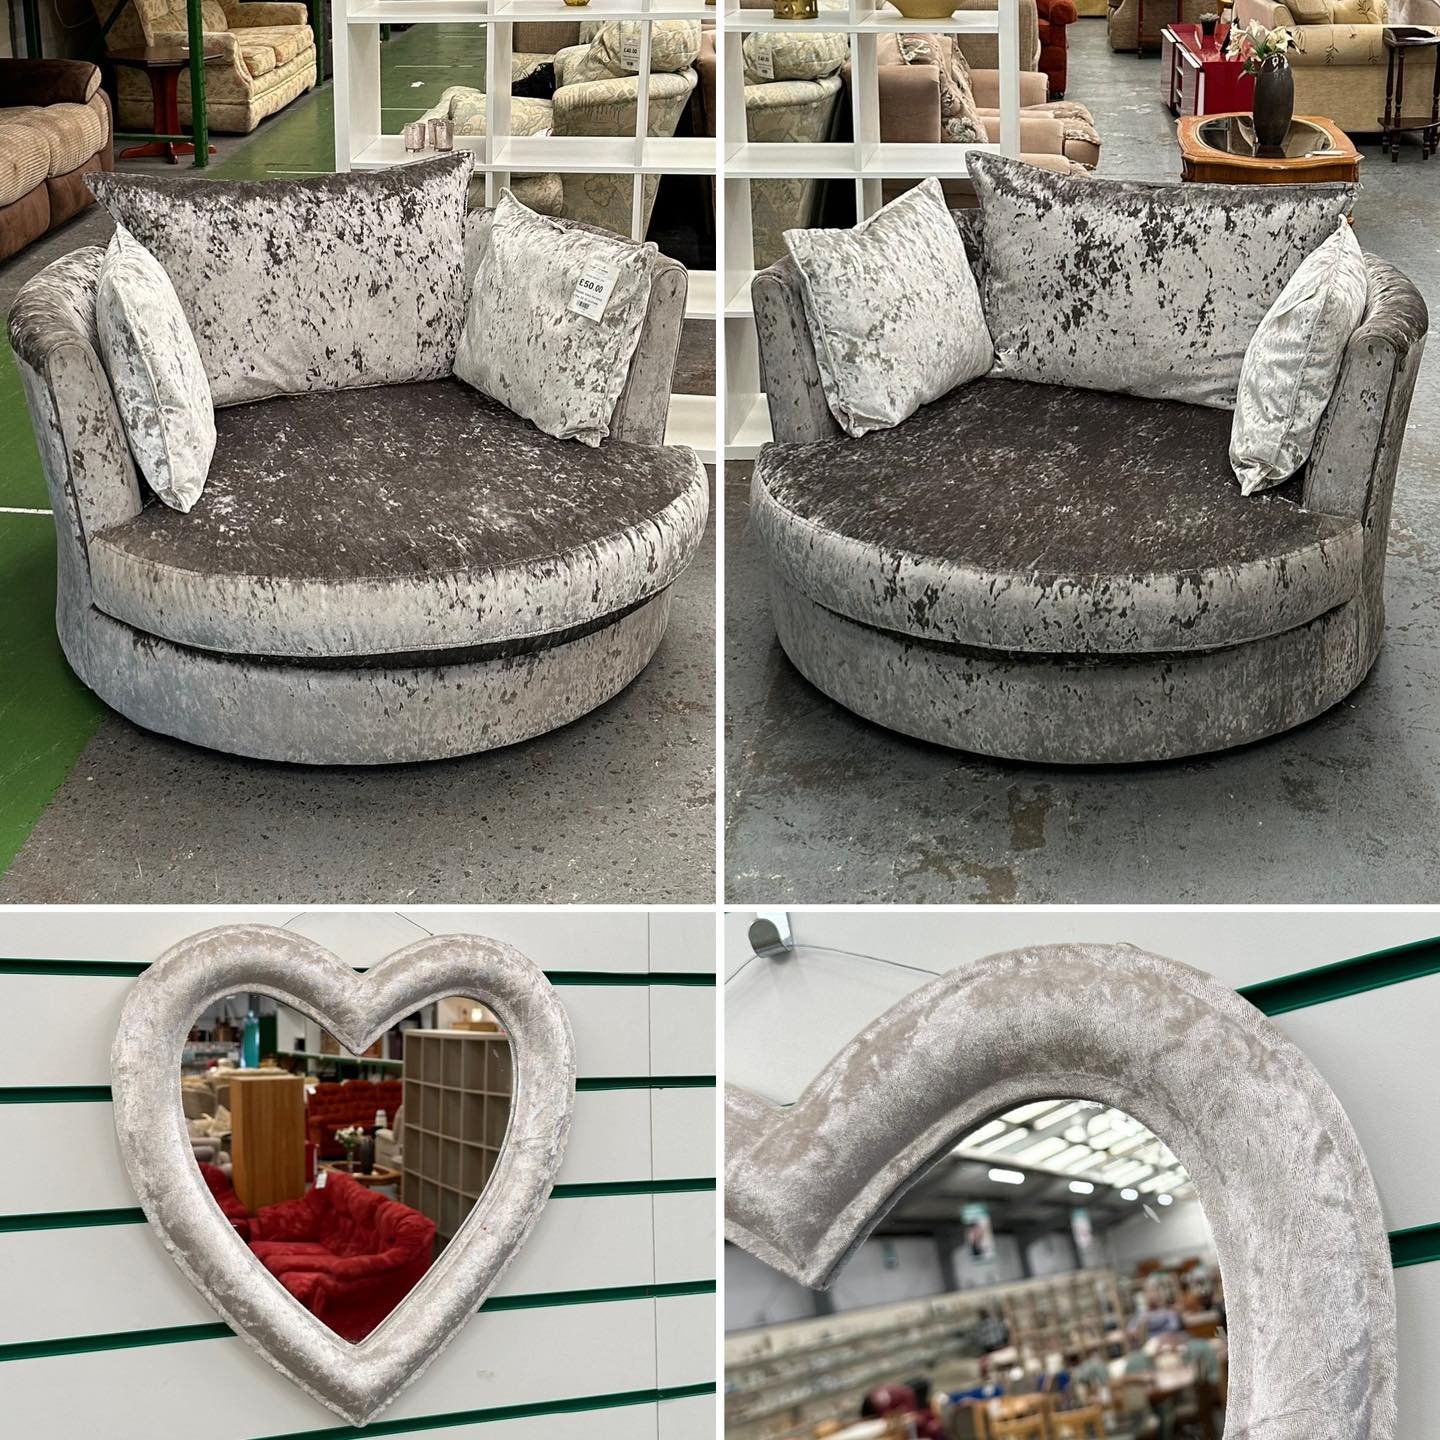 ✨ ✨ YNYSHIR ✨ ✨

We have a beautiful selection of pre loved furniture available in our showroom so why not visit us today and grab yourselves a bargain 😁

📞 01443 680090 - Option 2 📞

‼️ Please note as these items are pre owned, they may come with